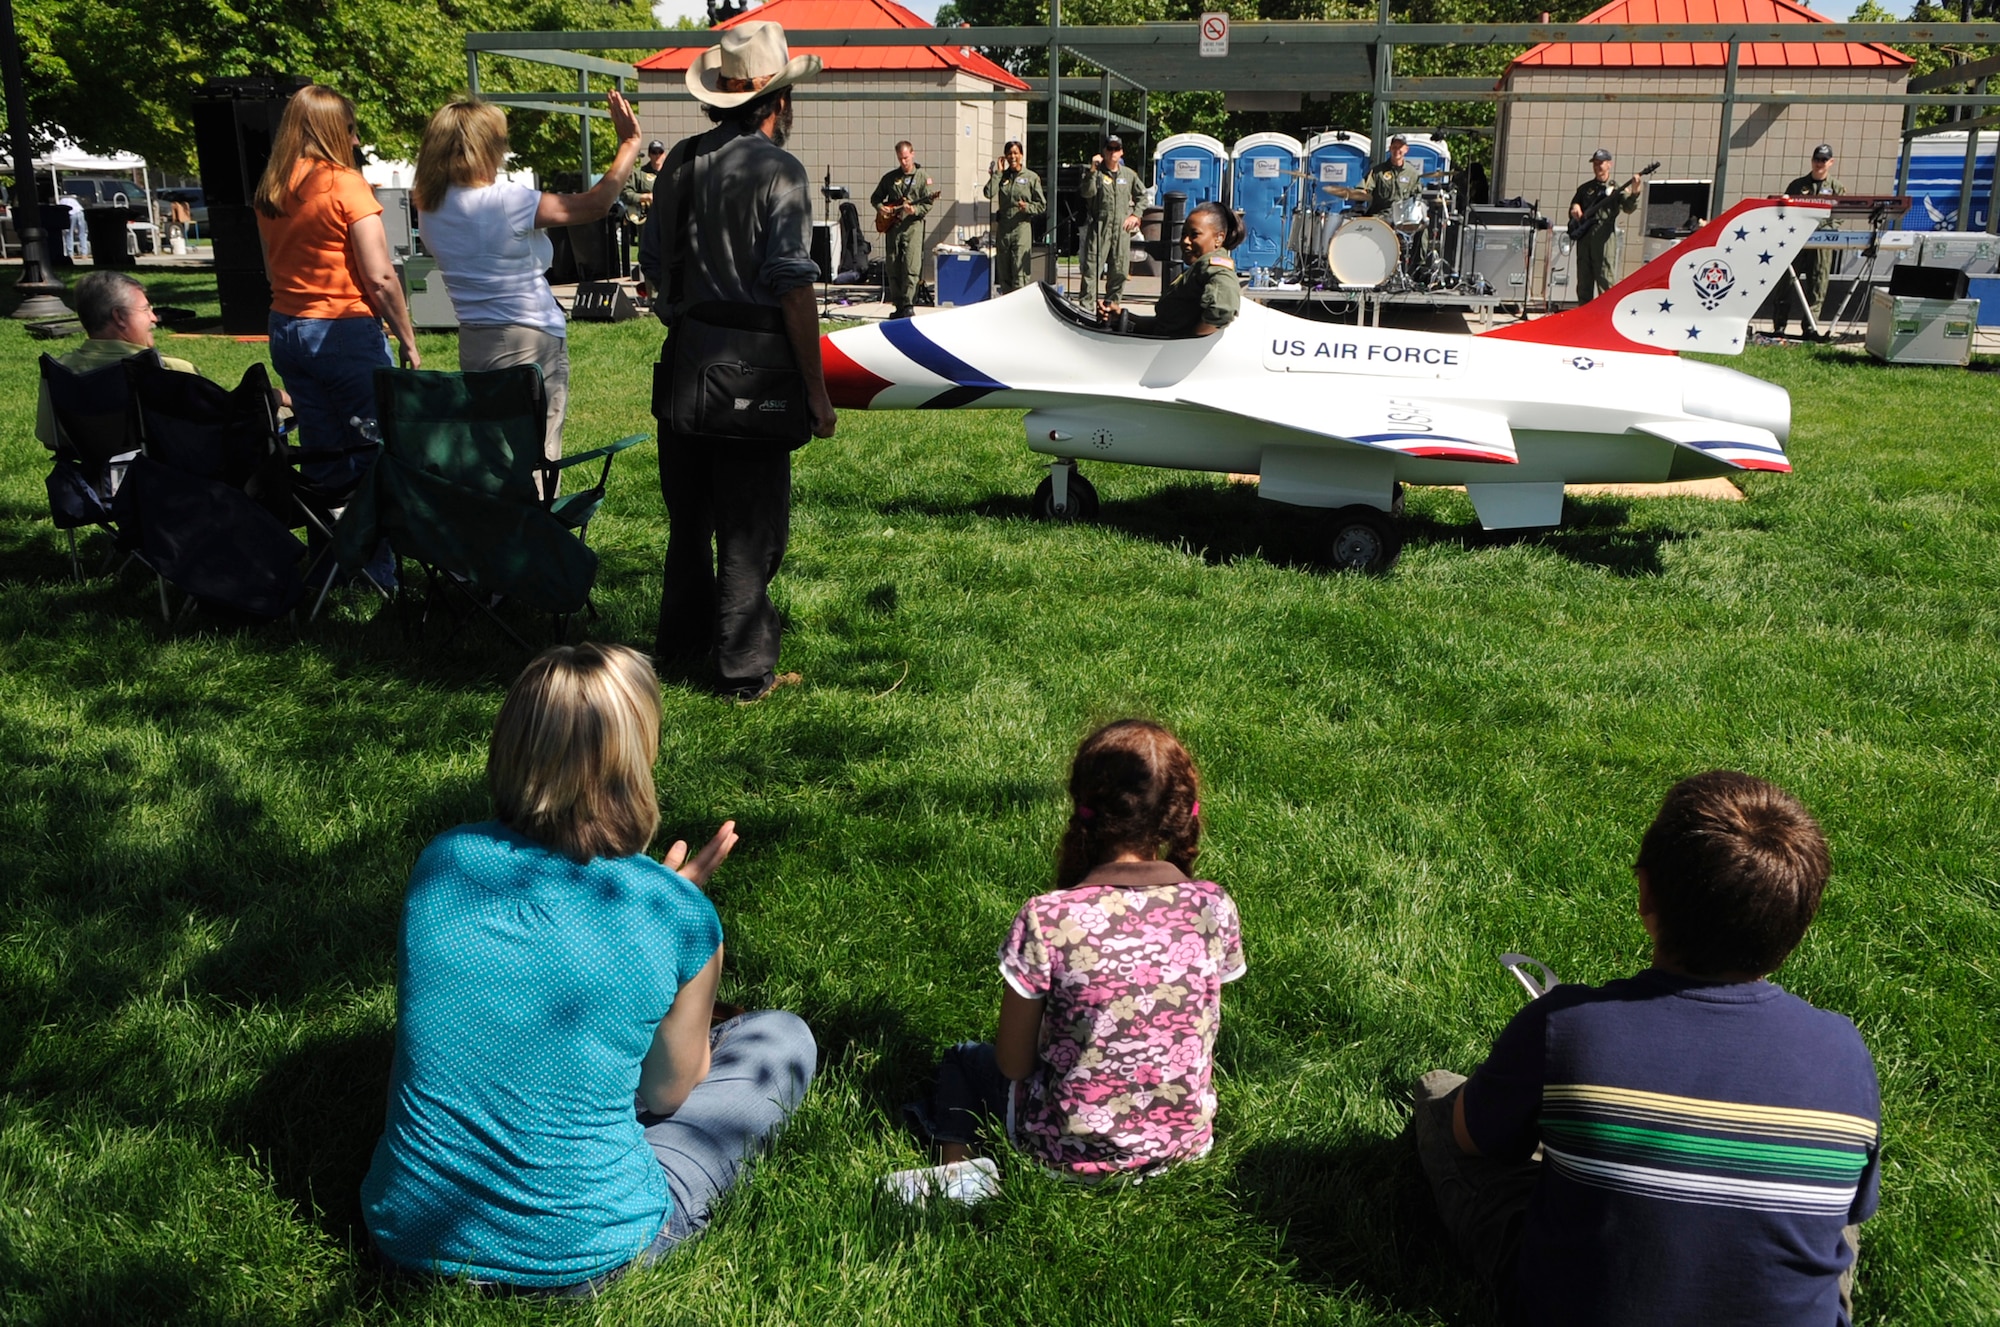 Salt Lake City locals watch Master Sgt. Regina Coonrod "zoom" by them in a toy-model F-16 Fighting Falcon during the "Our Nation's Defenders Showcase" at Pioneer Park for Air Force Week Salt Lake City June 2. Sergeant Coonrod is a vocalist with the band Max Impact, a performance unit with the United States Air Force Band from Bolling Air Force Base, Washington, D.C. (U.S. Air Force photo/Staff Sgt. Desiree N. Palacios)